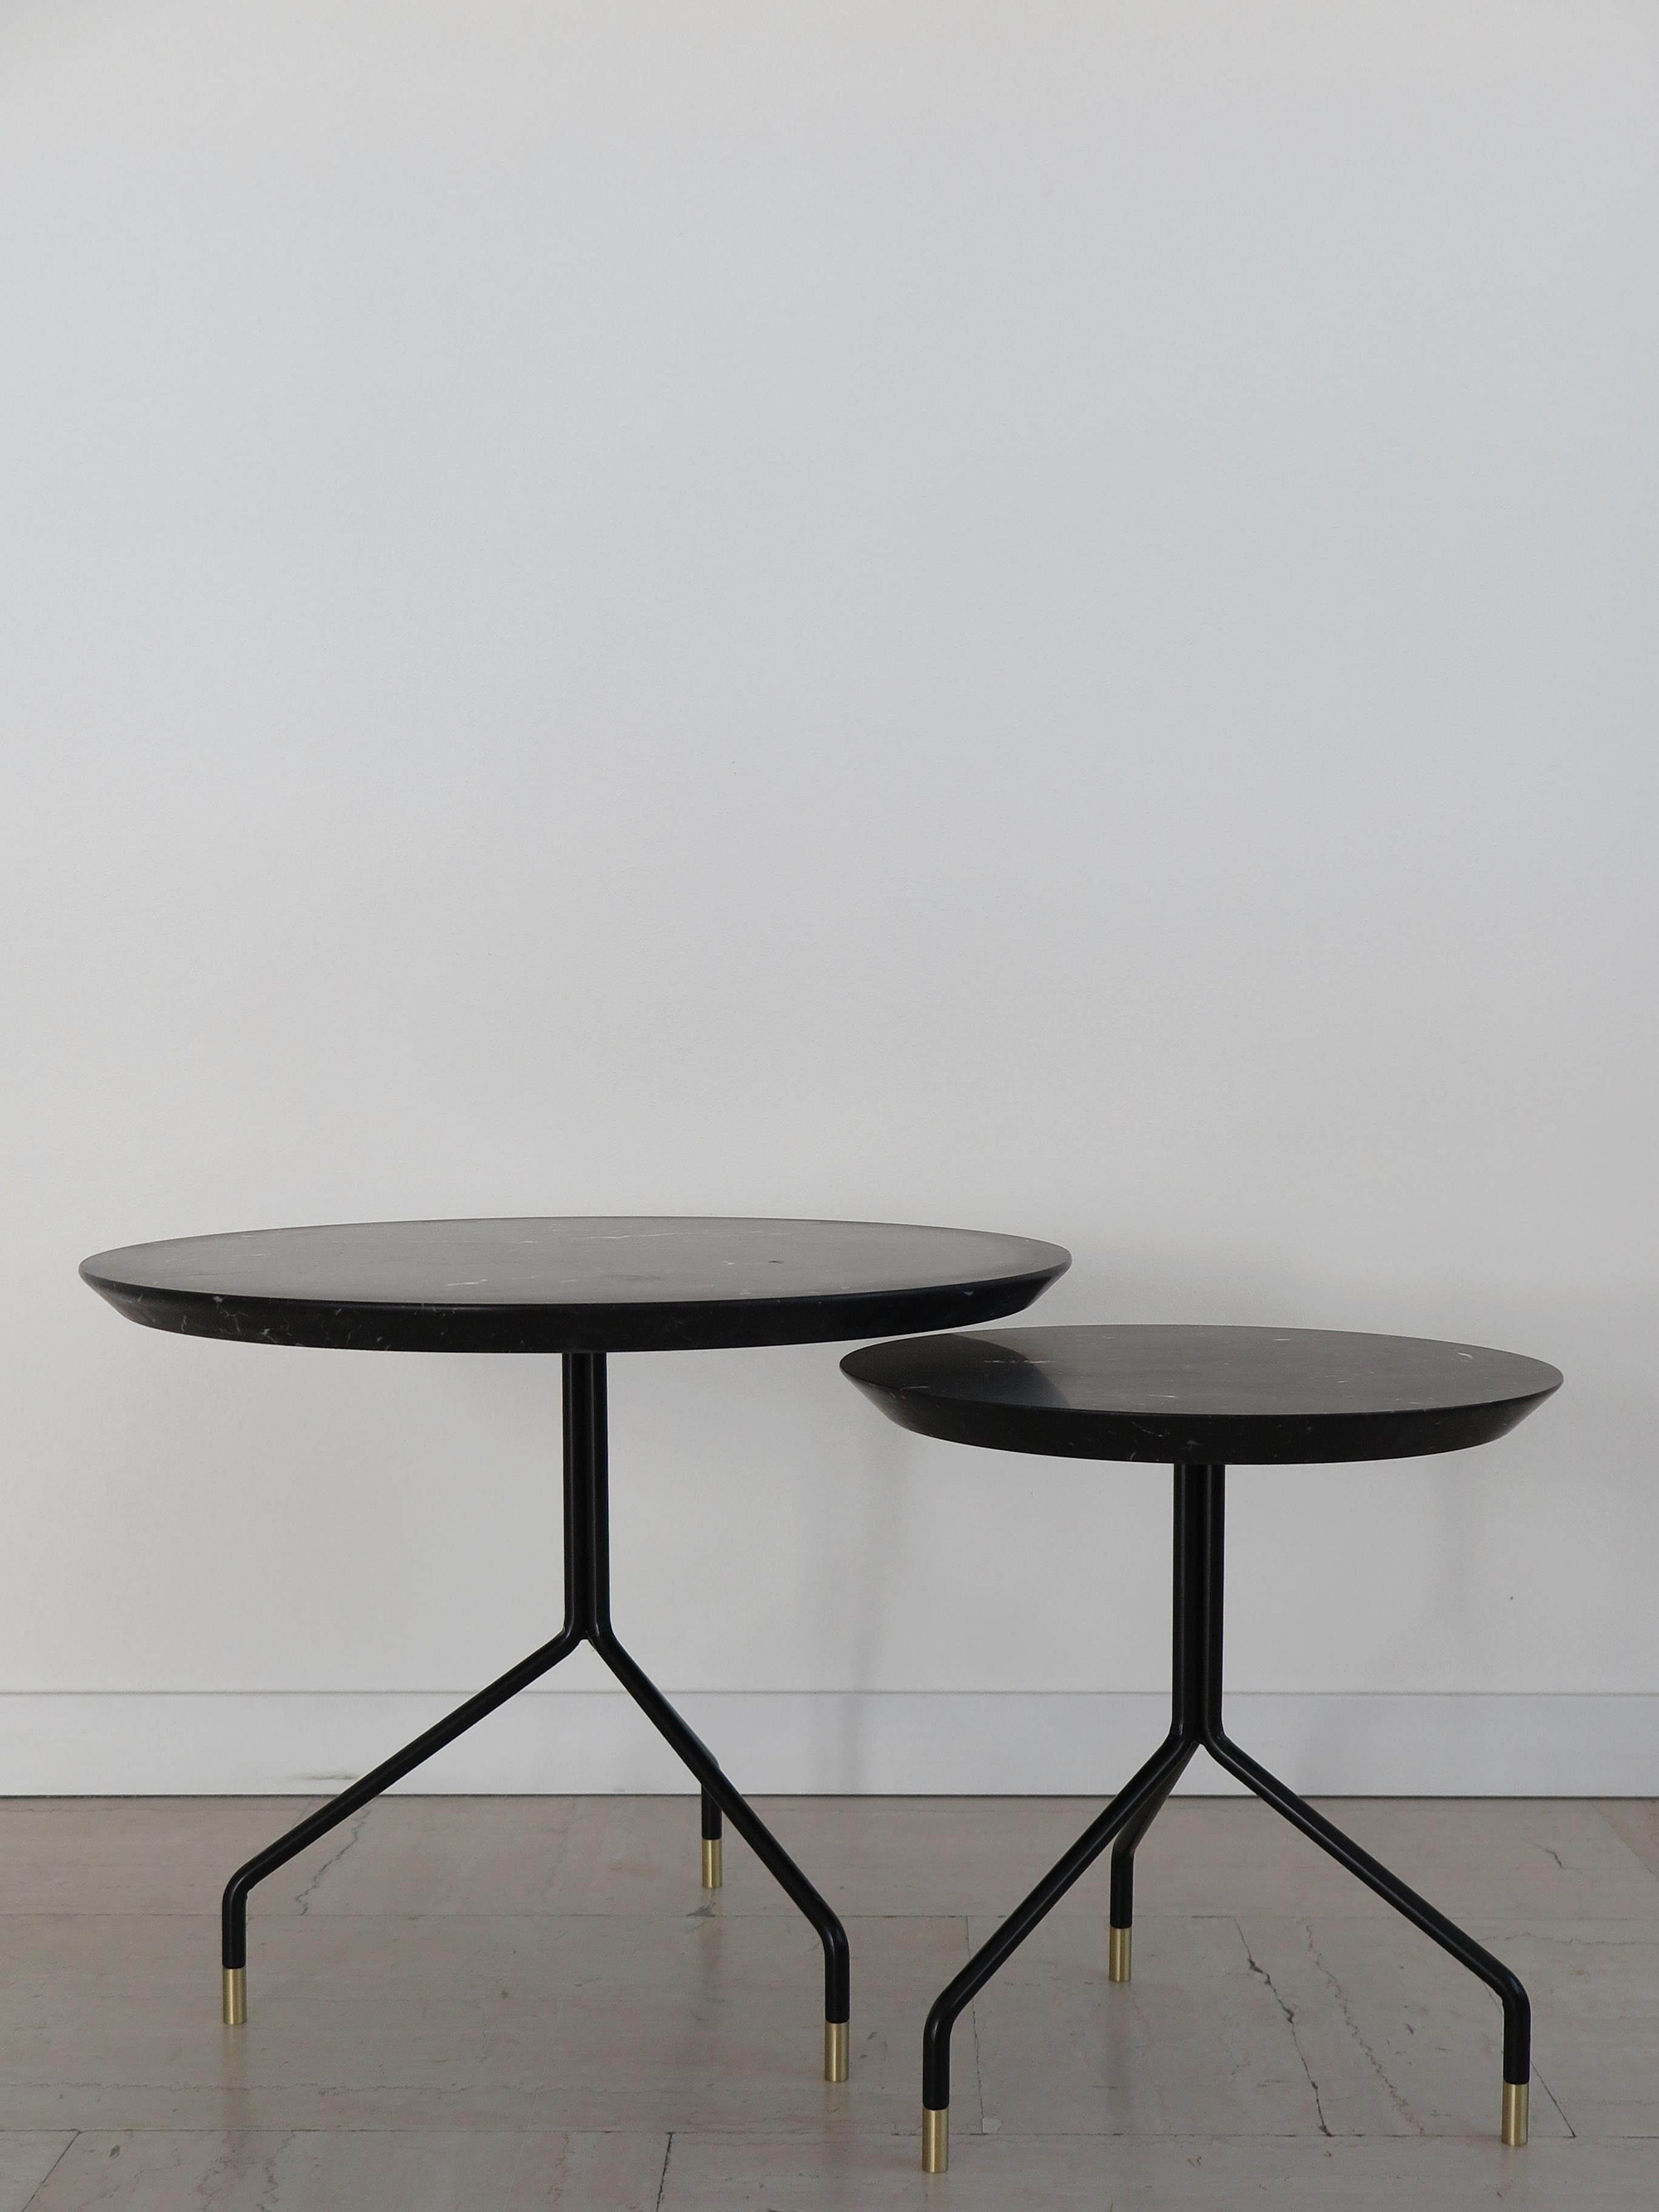 Italian contemporary round coffee tables set of two, top with Black Marquinia Marble matt and black painted metal structure with brass terminals, new design Capperidicasa, limited edition.

Dimensions:
- Small size diameter 40 cm - height 43 cm
-